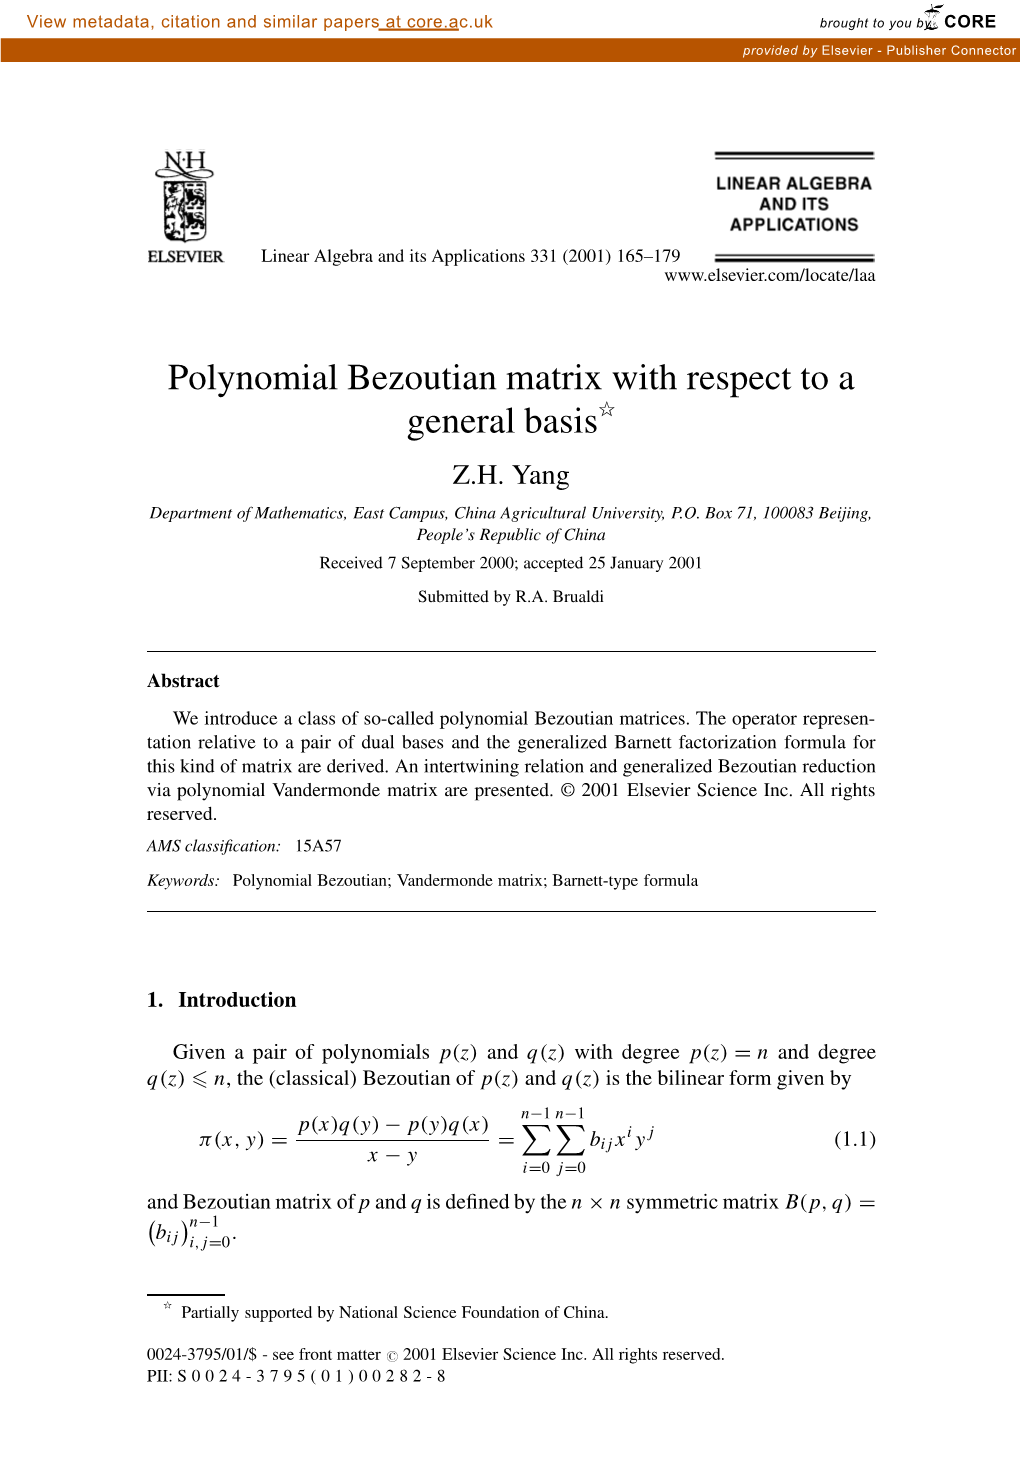 Polynomial Bezoutian Matrix with Respect to a General Basisୋ Z.H